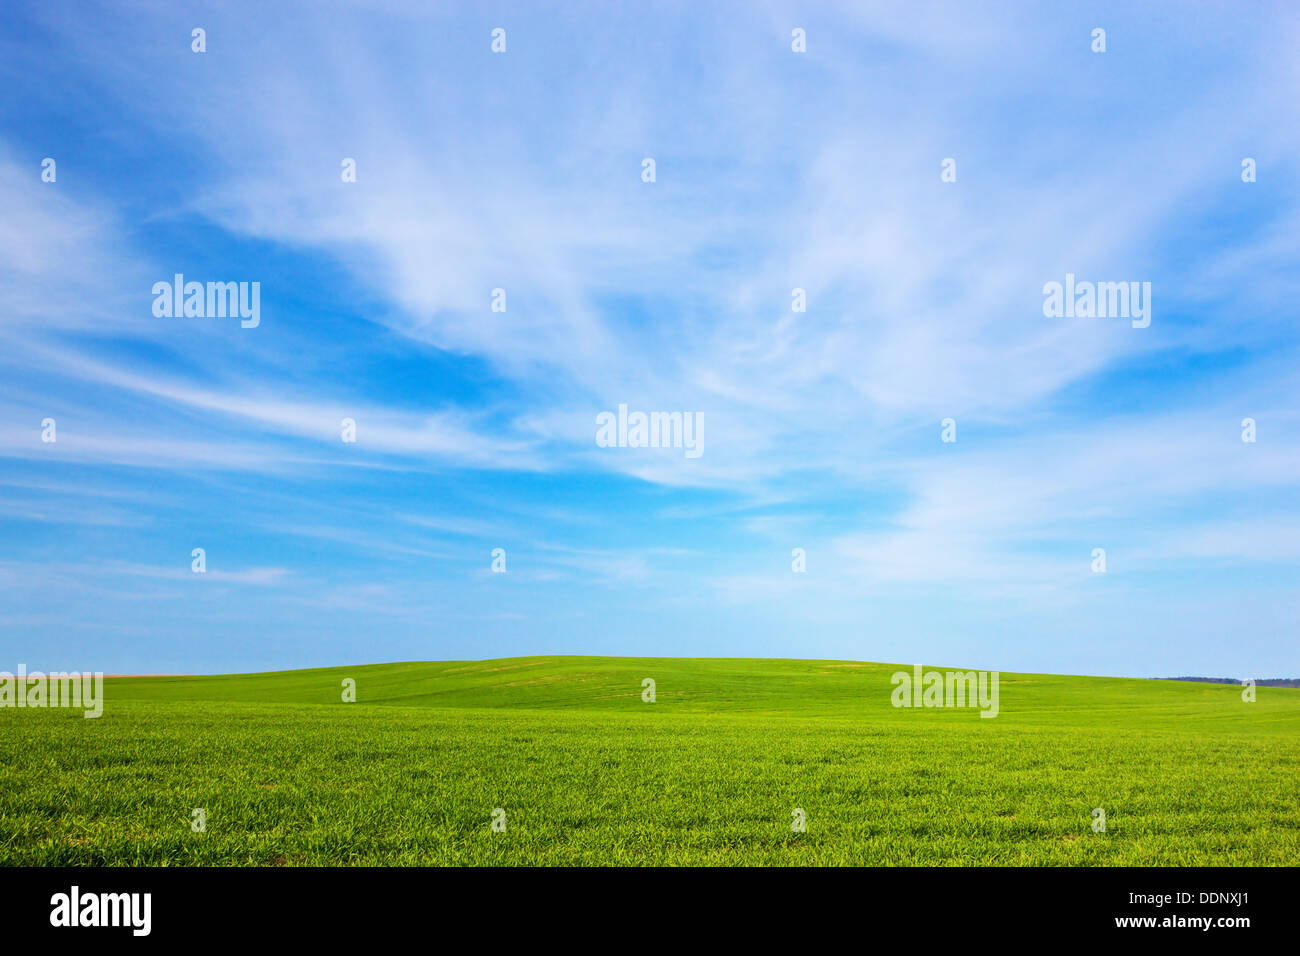 Green field and blue sky landscape. Spring / summer Stock Photo